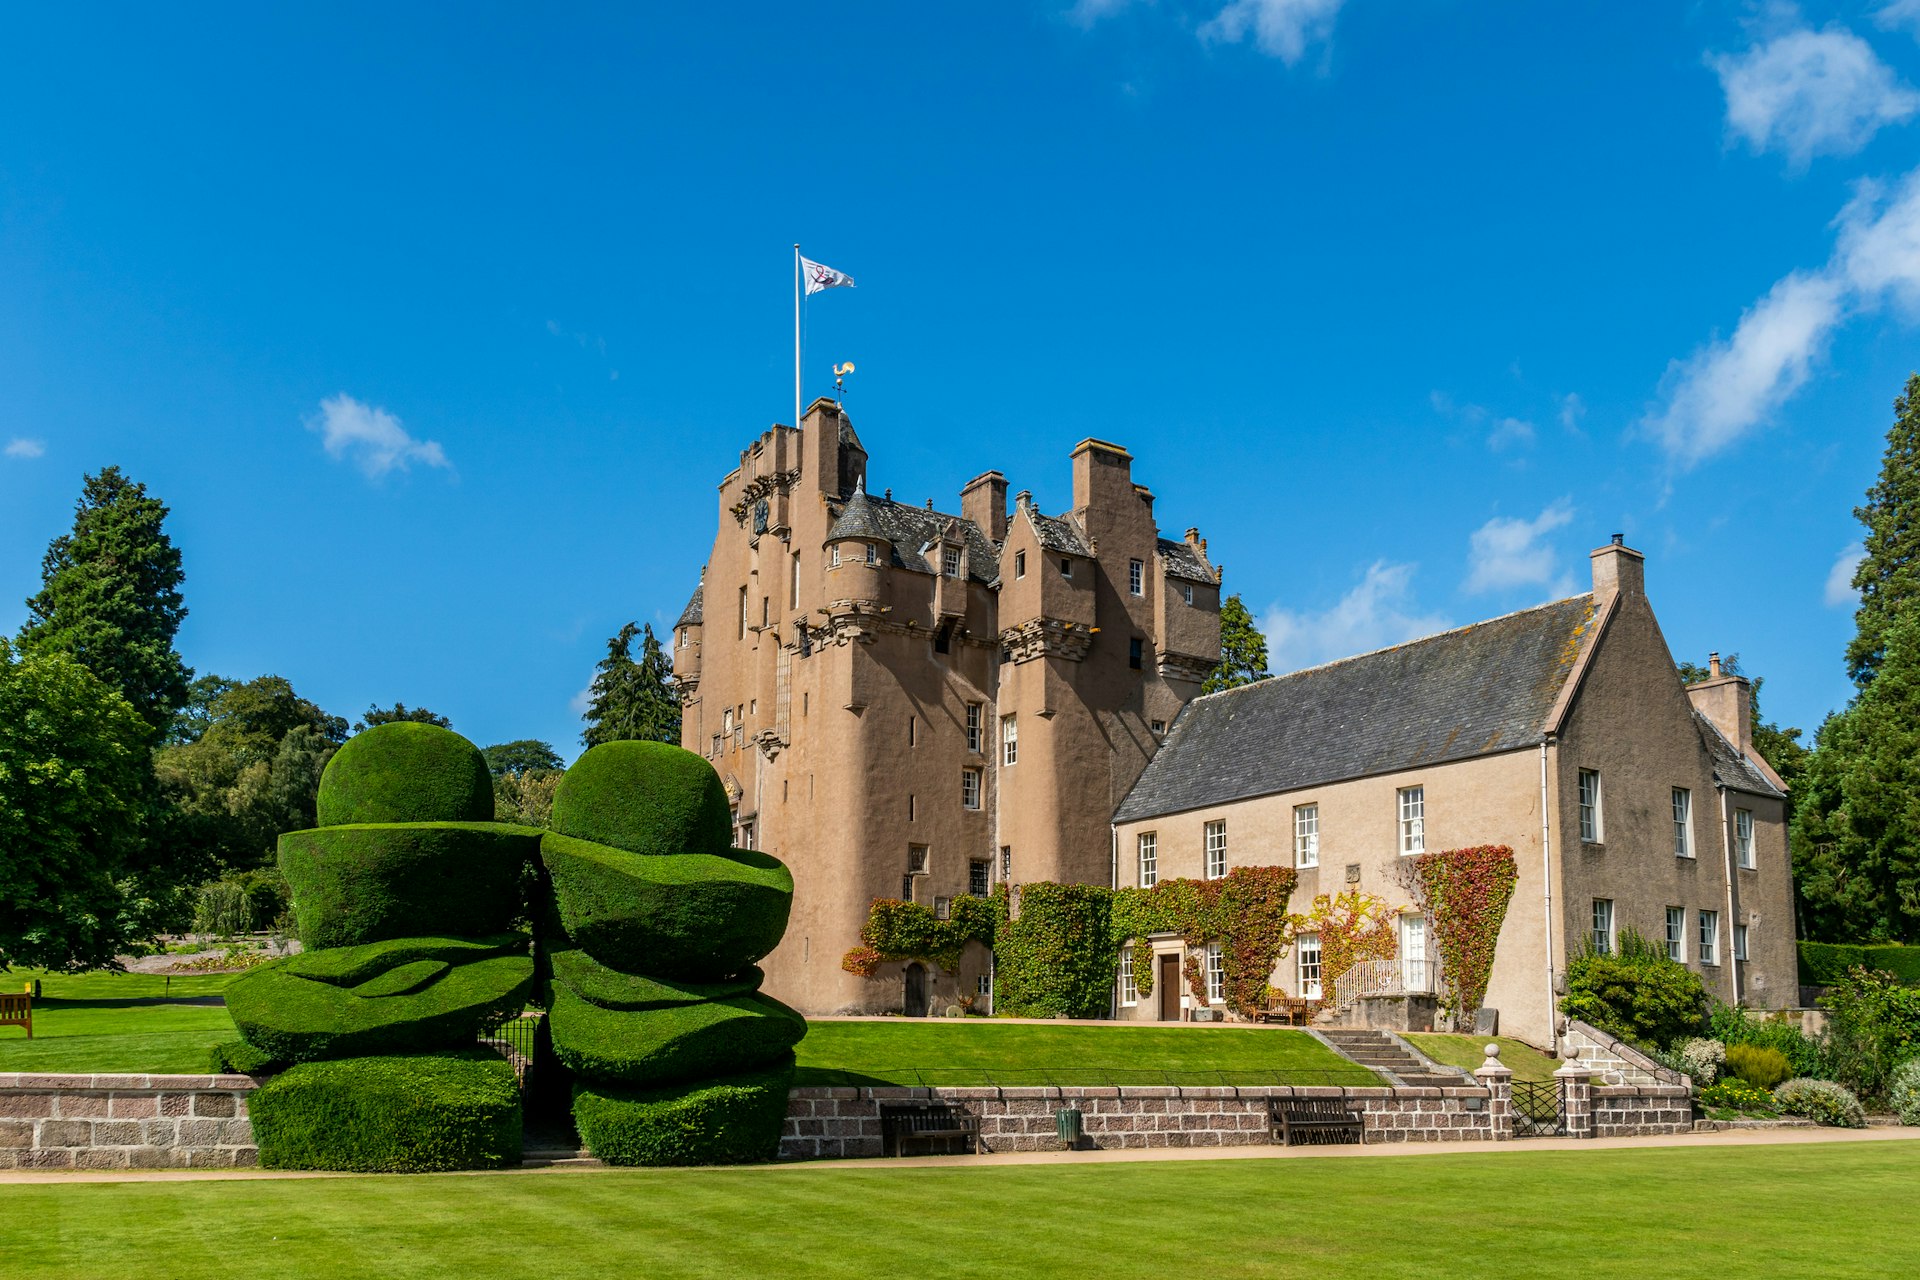 Crathes Castle and Walled Garden